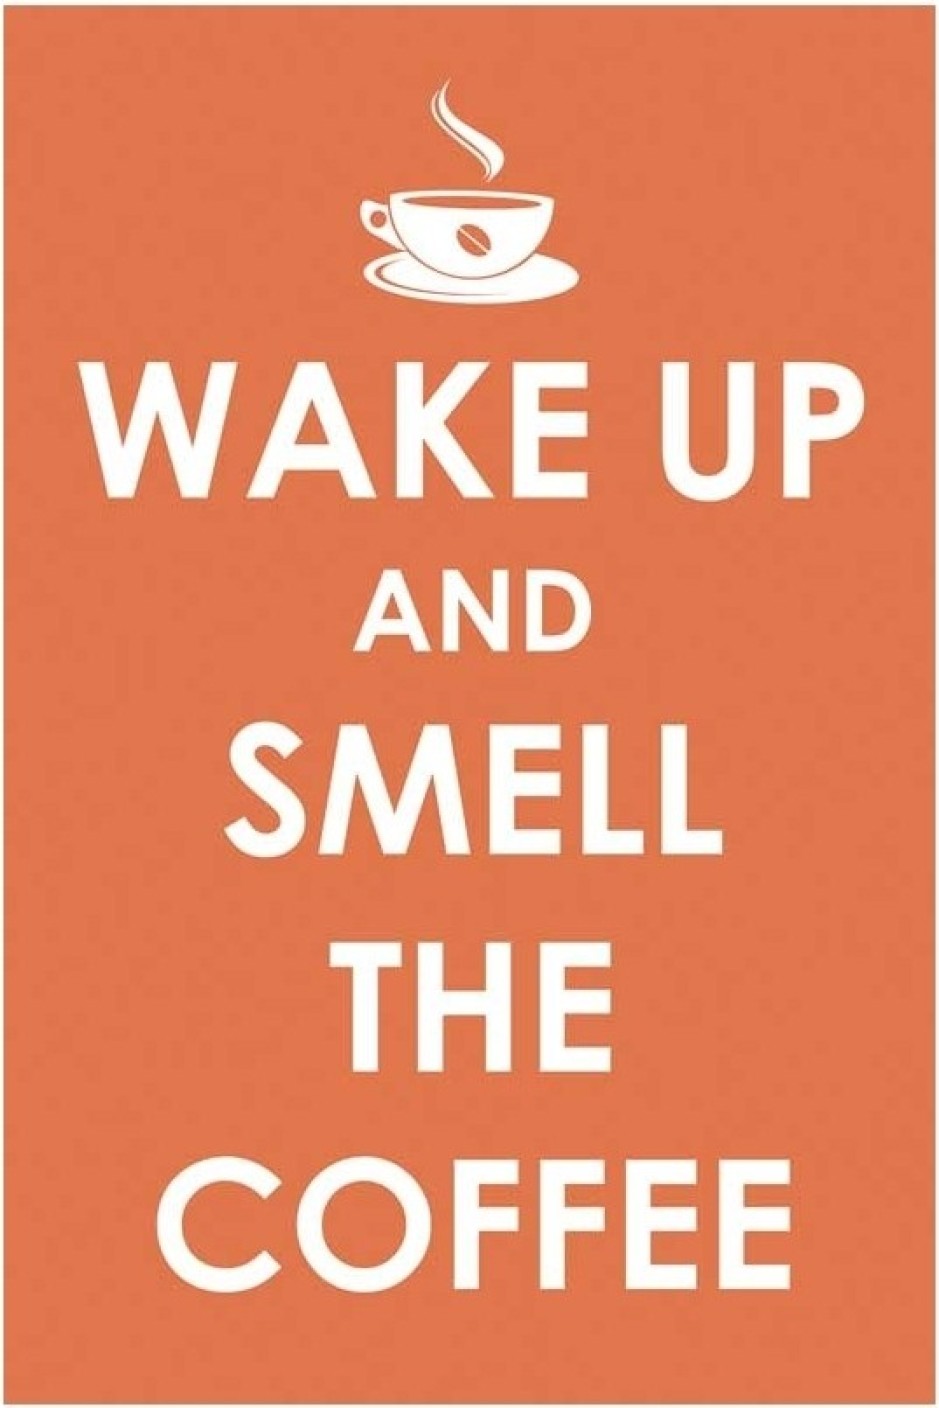 Wake Up and Smell Coffee Paper Print - Humor posters in India - Buy art ...